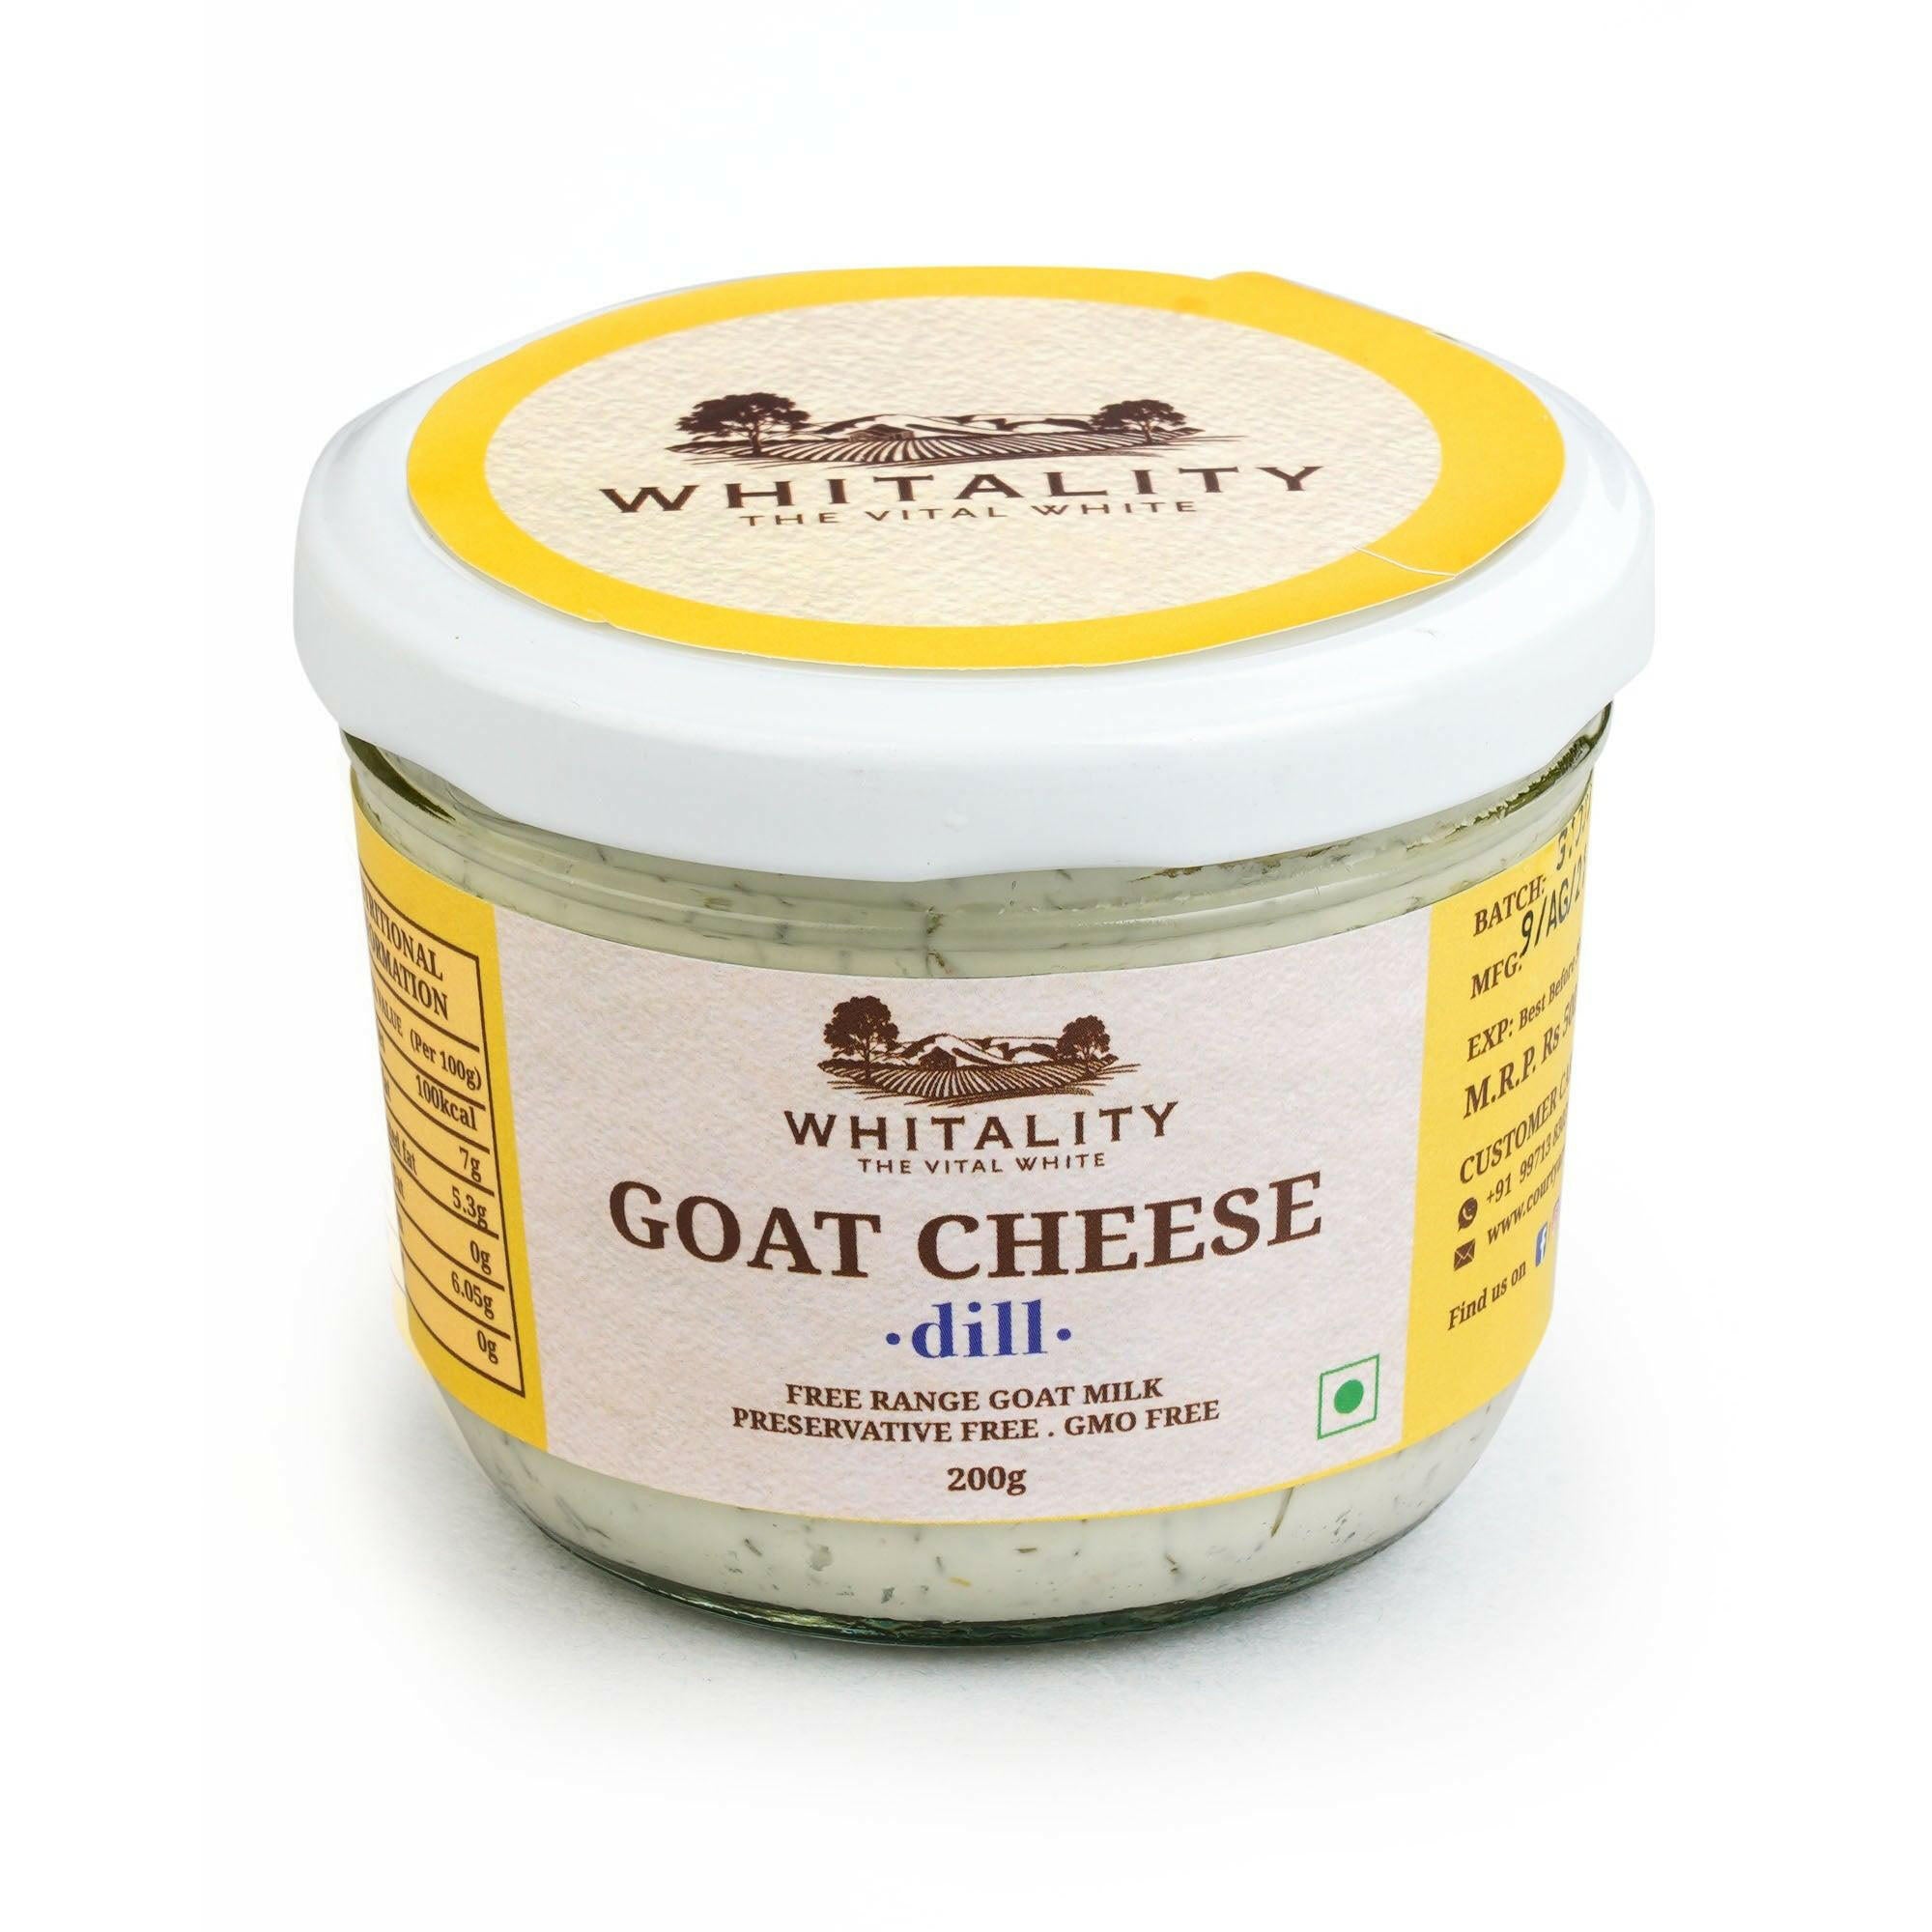 dill goat cheese